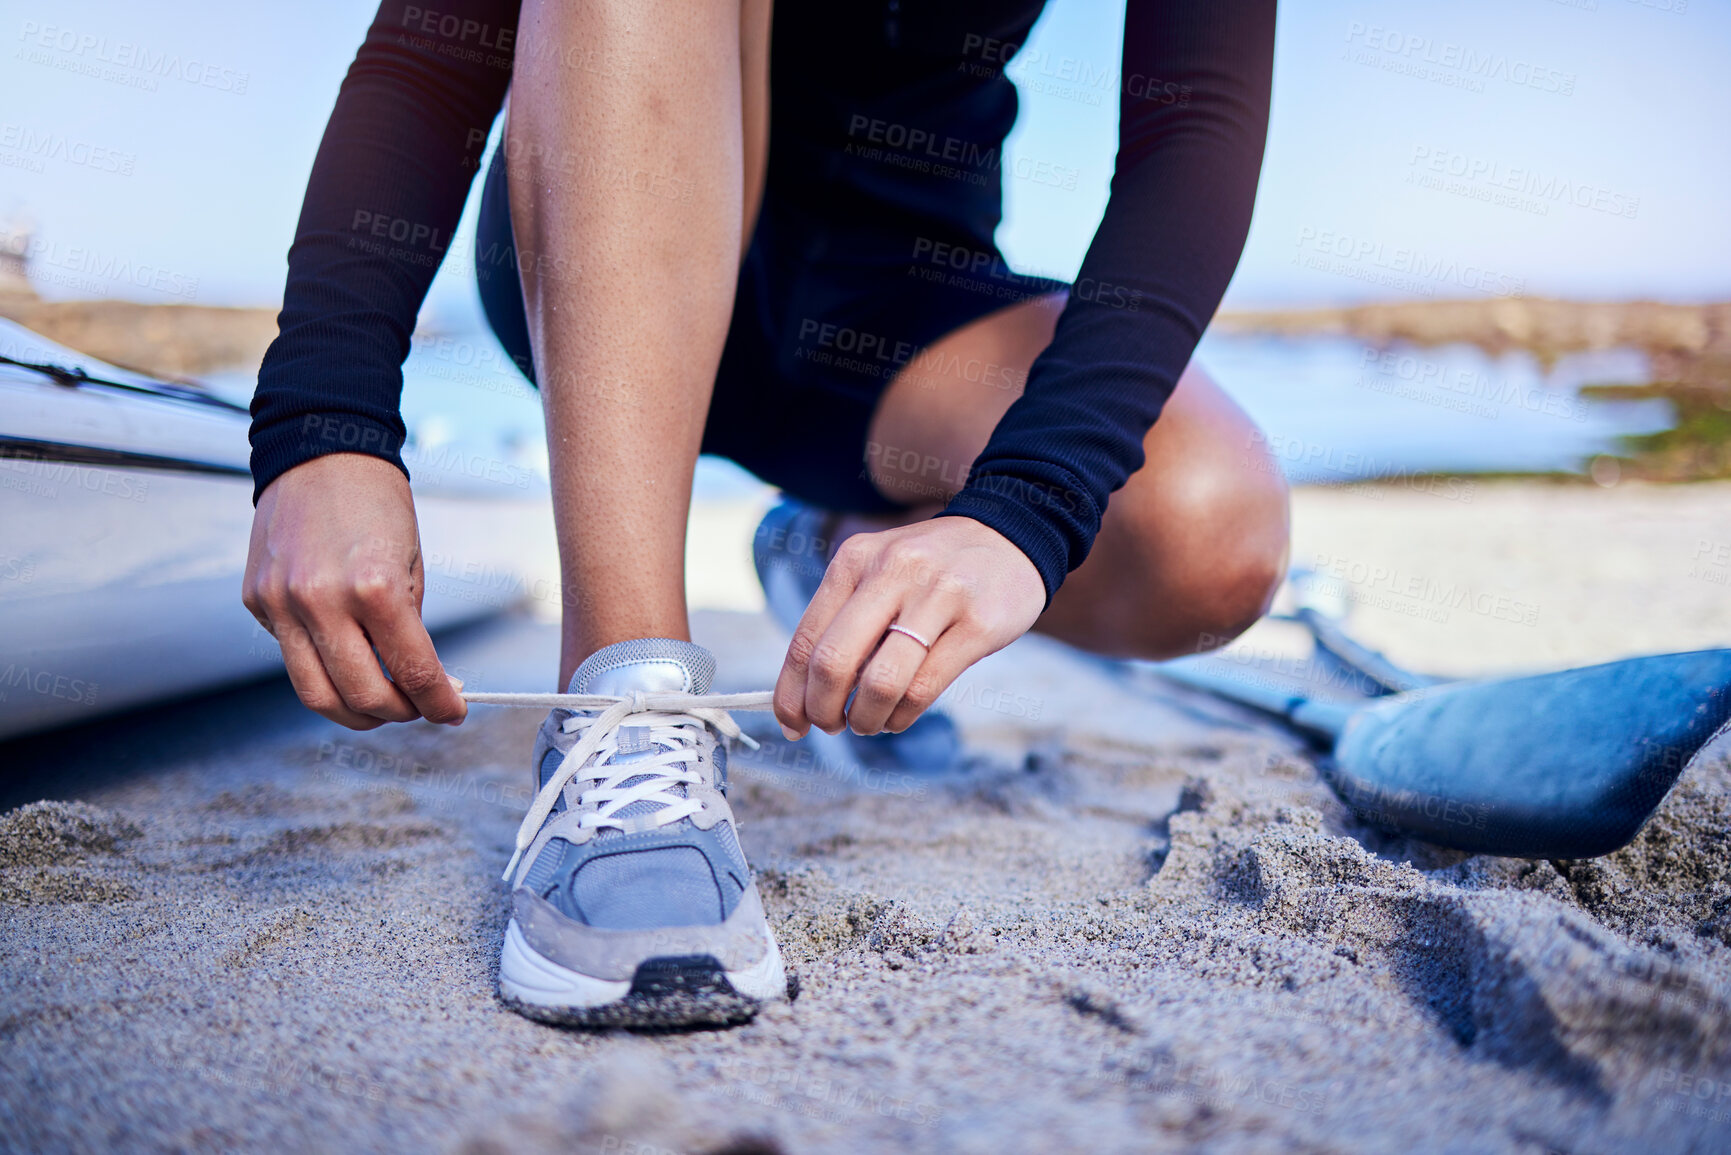 Buy stock photo Hands tie shoes, beach and athlete start workout, training and kayak exercise outdoor. Sand, person and tying sneakers at ocean to prepare in fitness, sports and healthy body for wellness in summer.